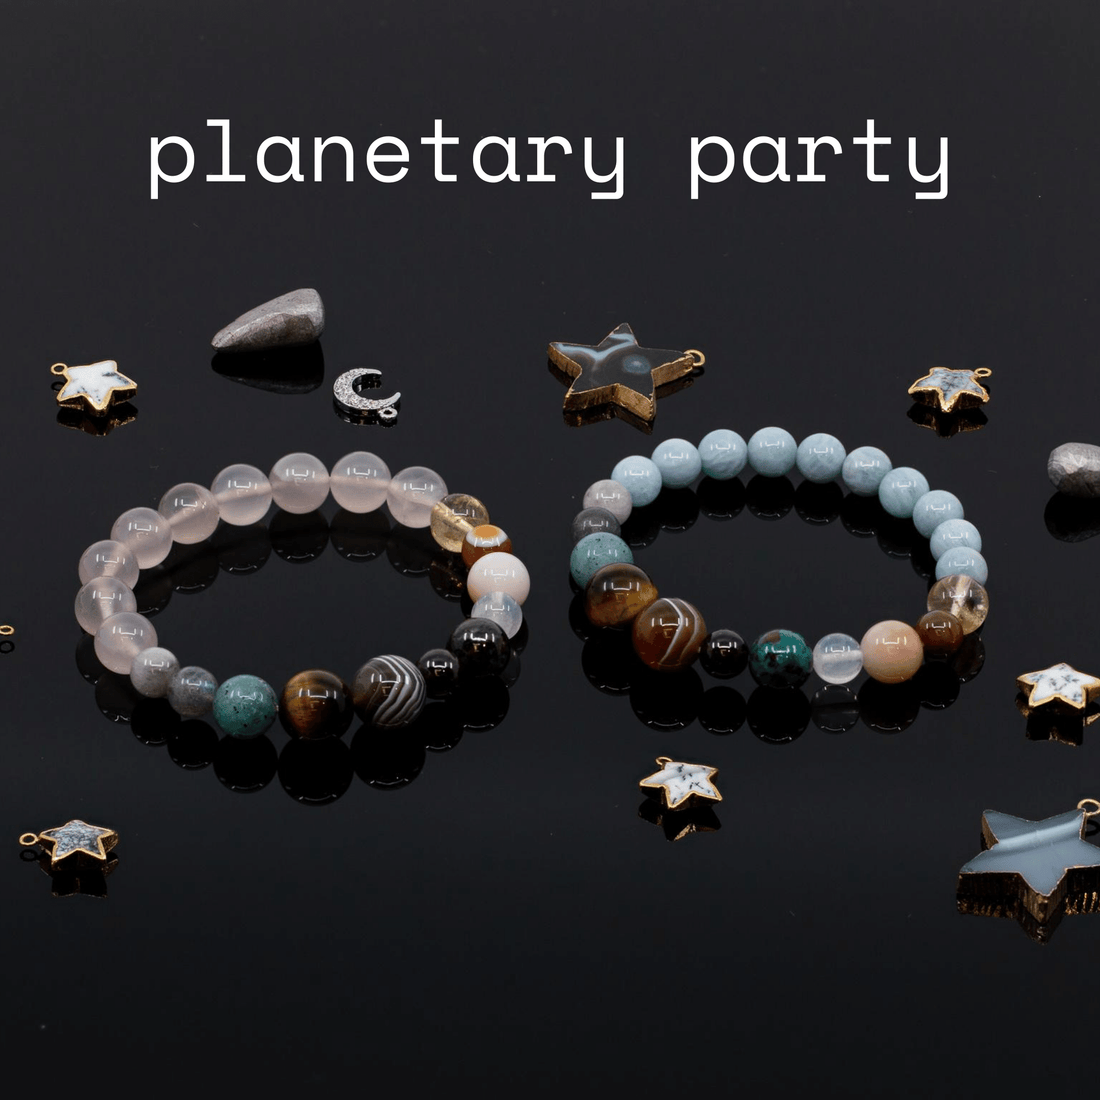 Planetary Party